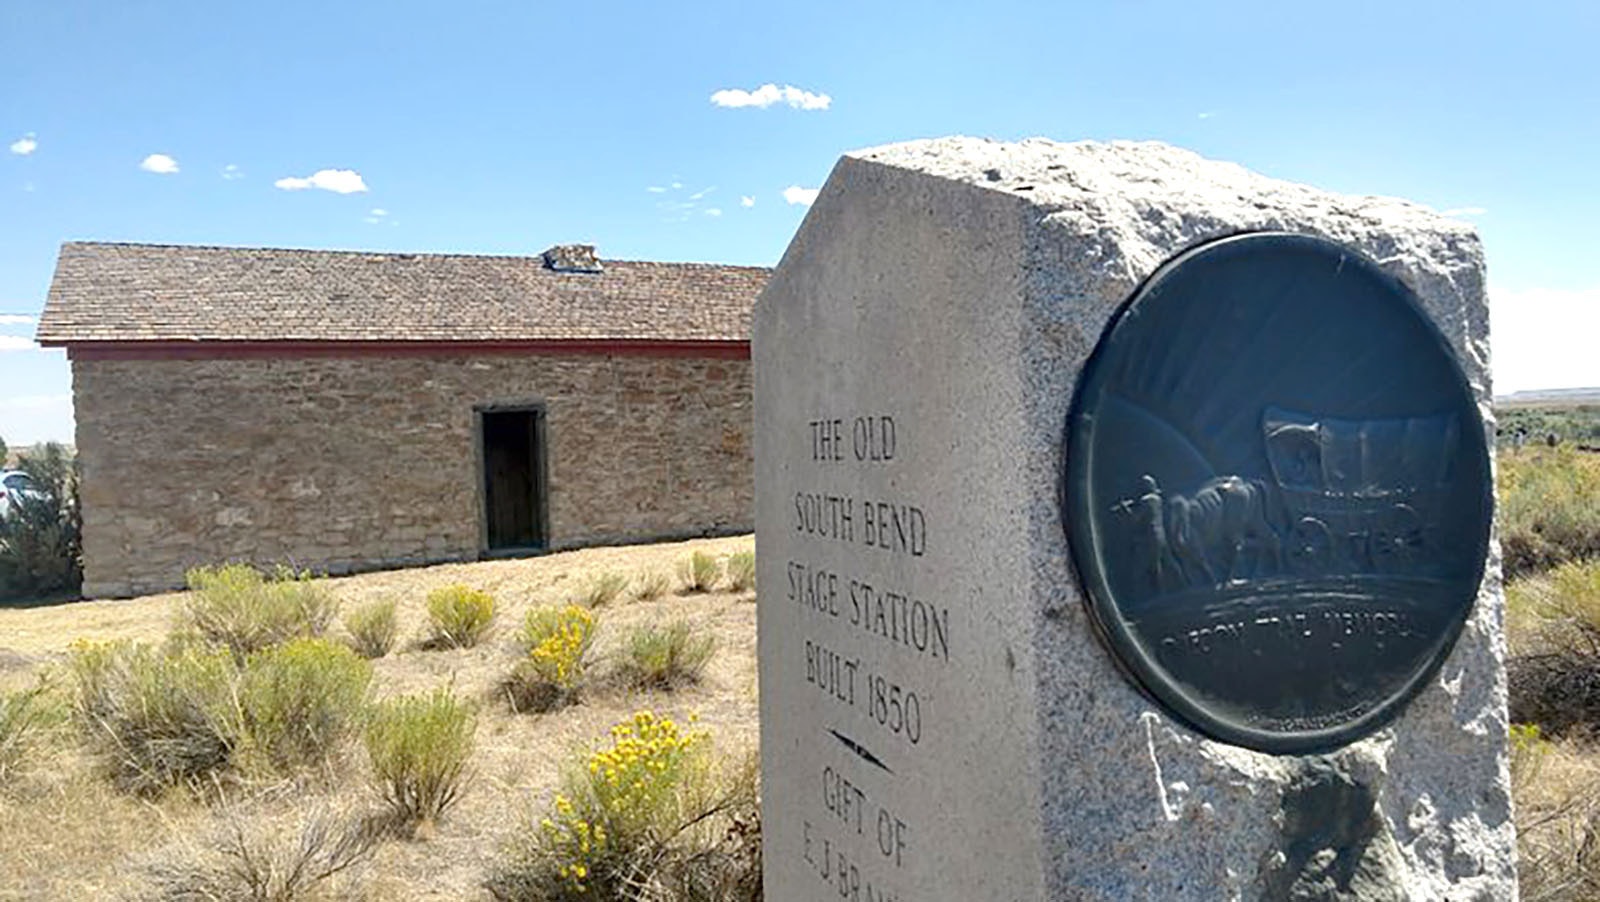 A marker at the Granger Stage Station acknowledges the place as a stop on numerous pioneer trails and the Pony Express.